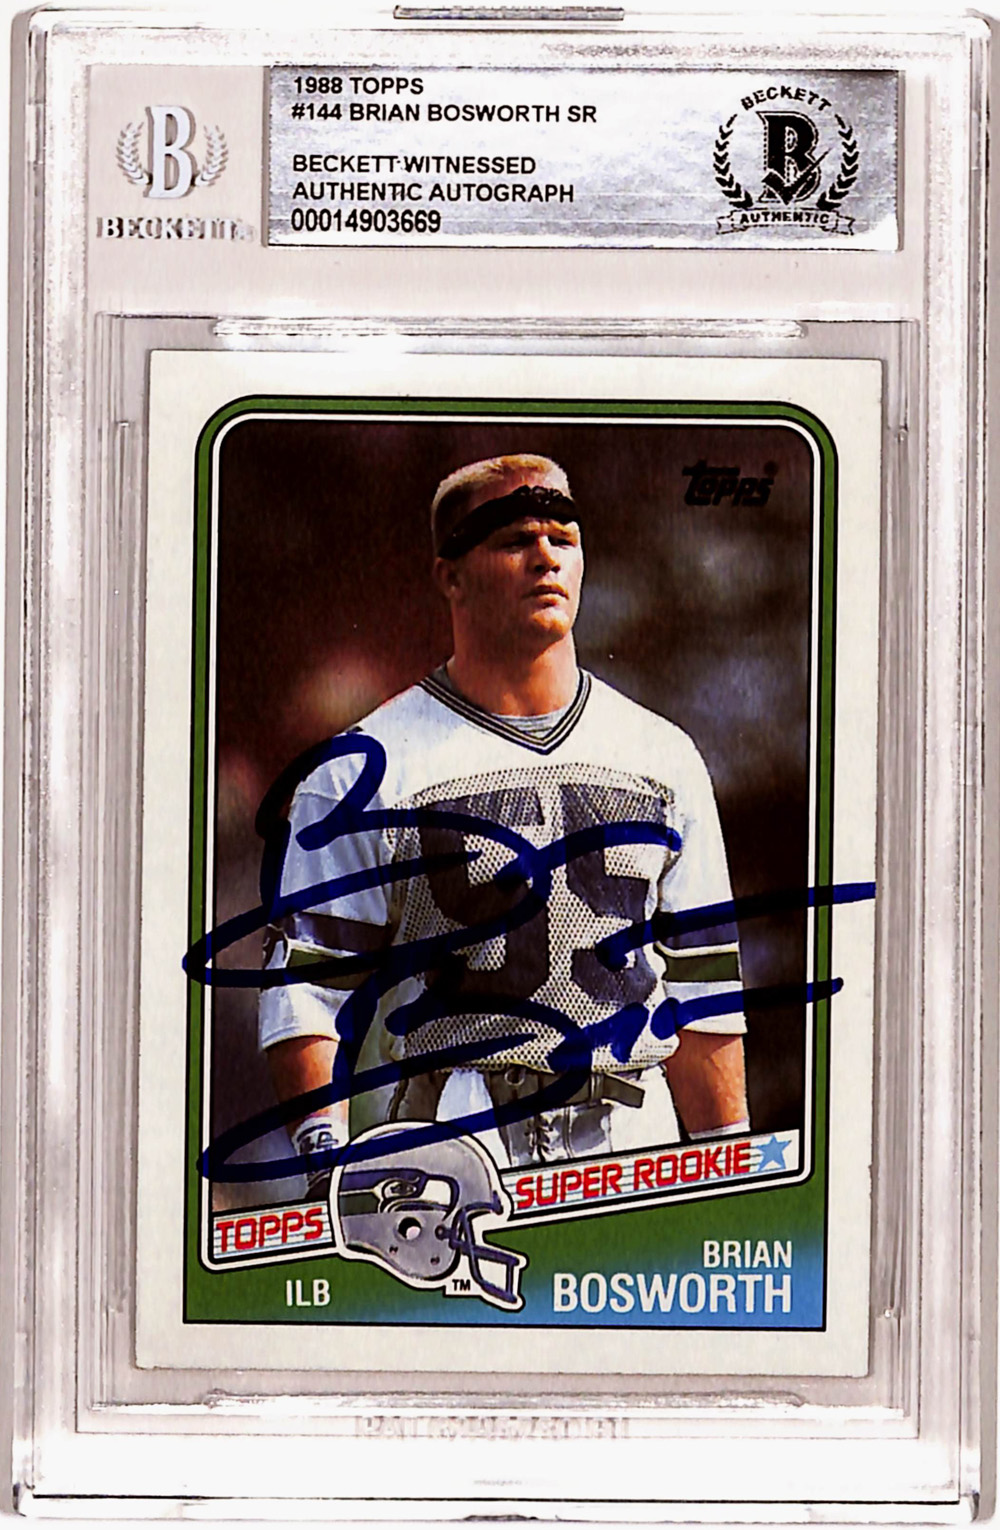 Brian Bosworth Autographed 1988 Topps #144 Rookie Card Beckett Slab